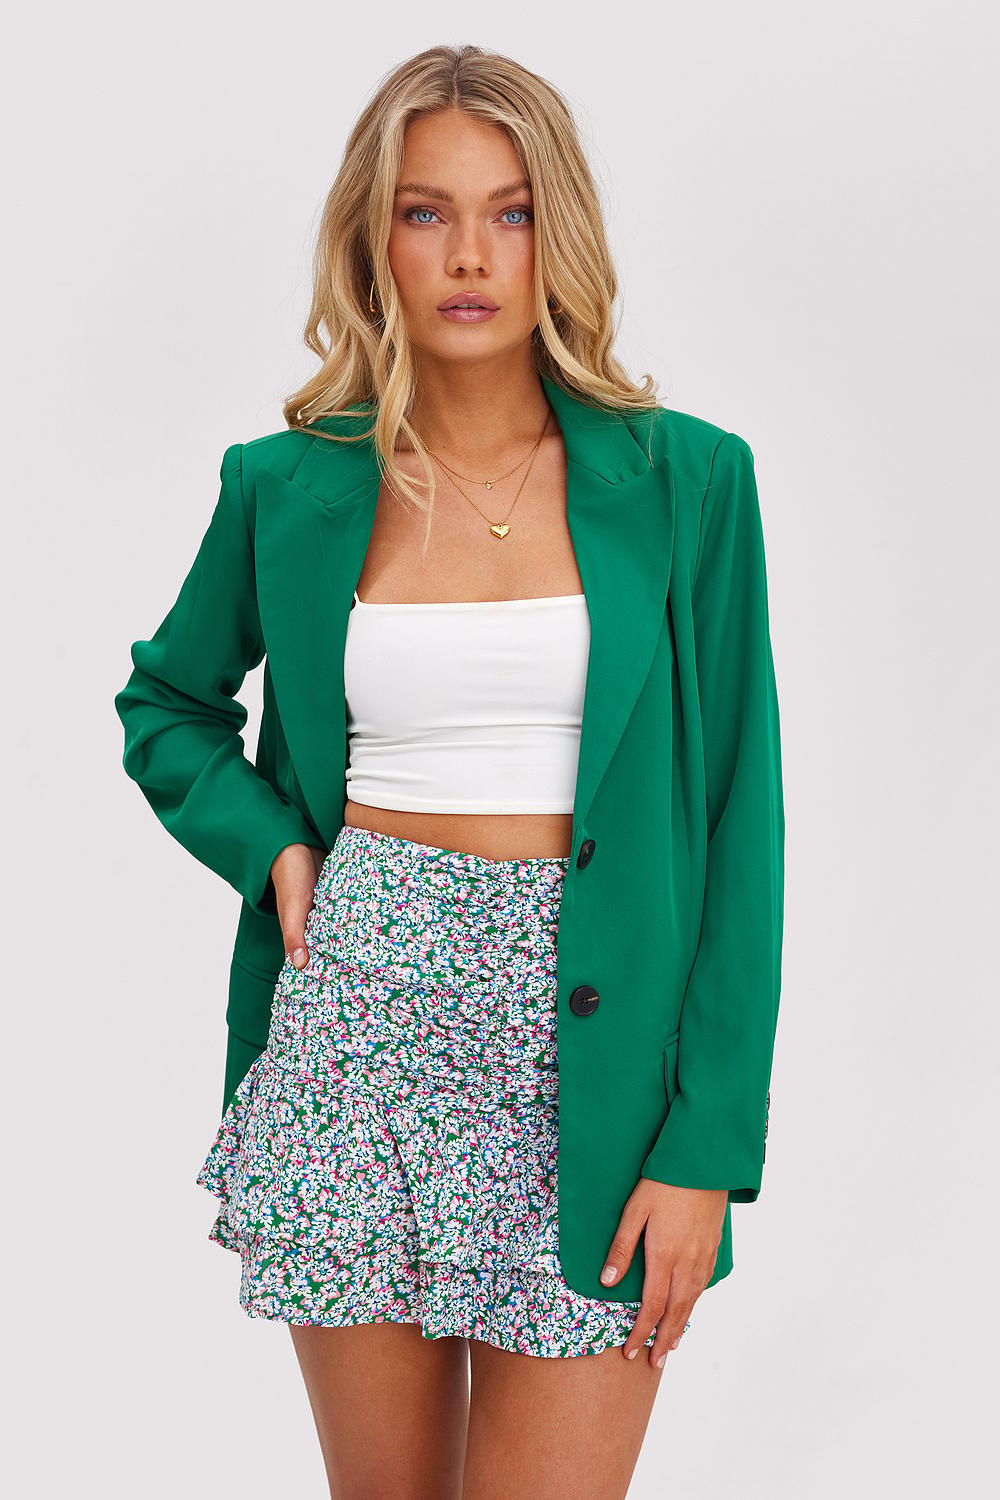 Green skirt with floral print